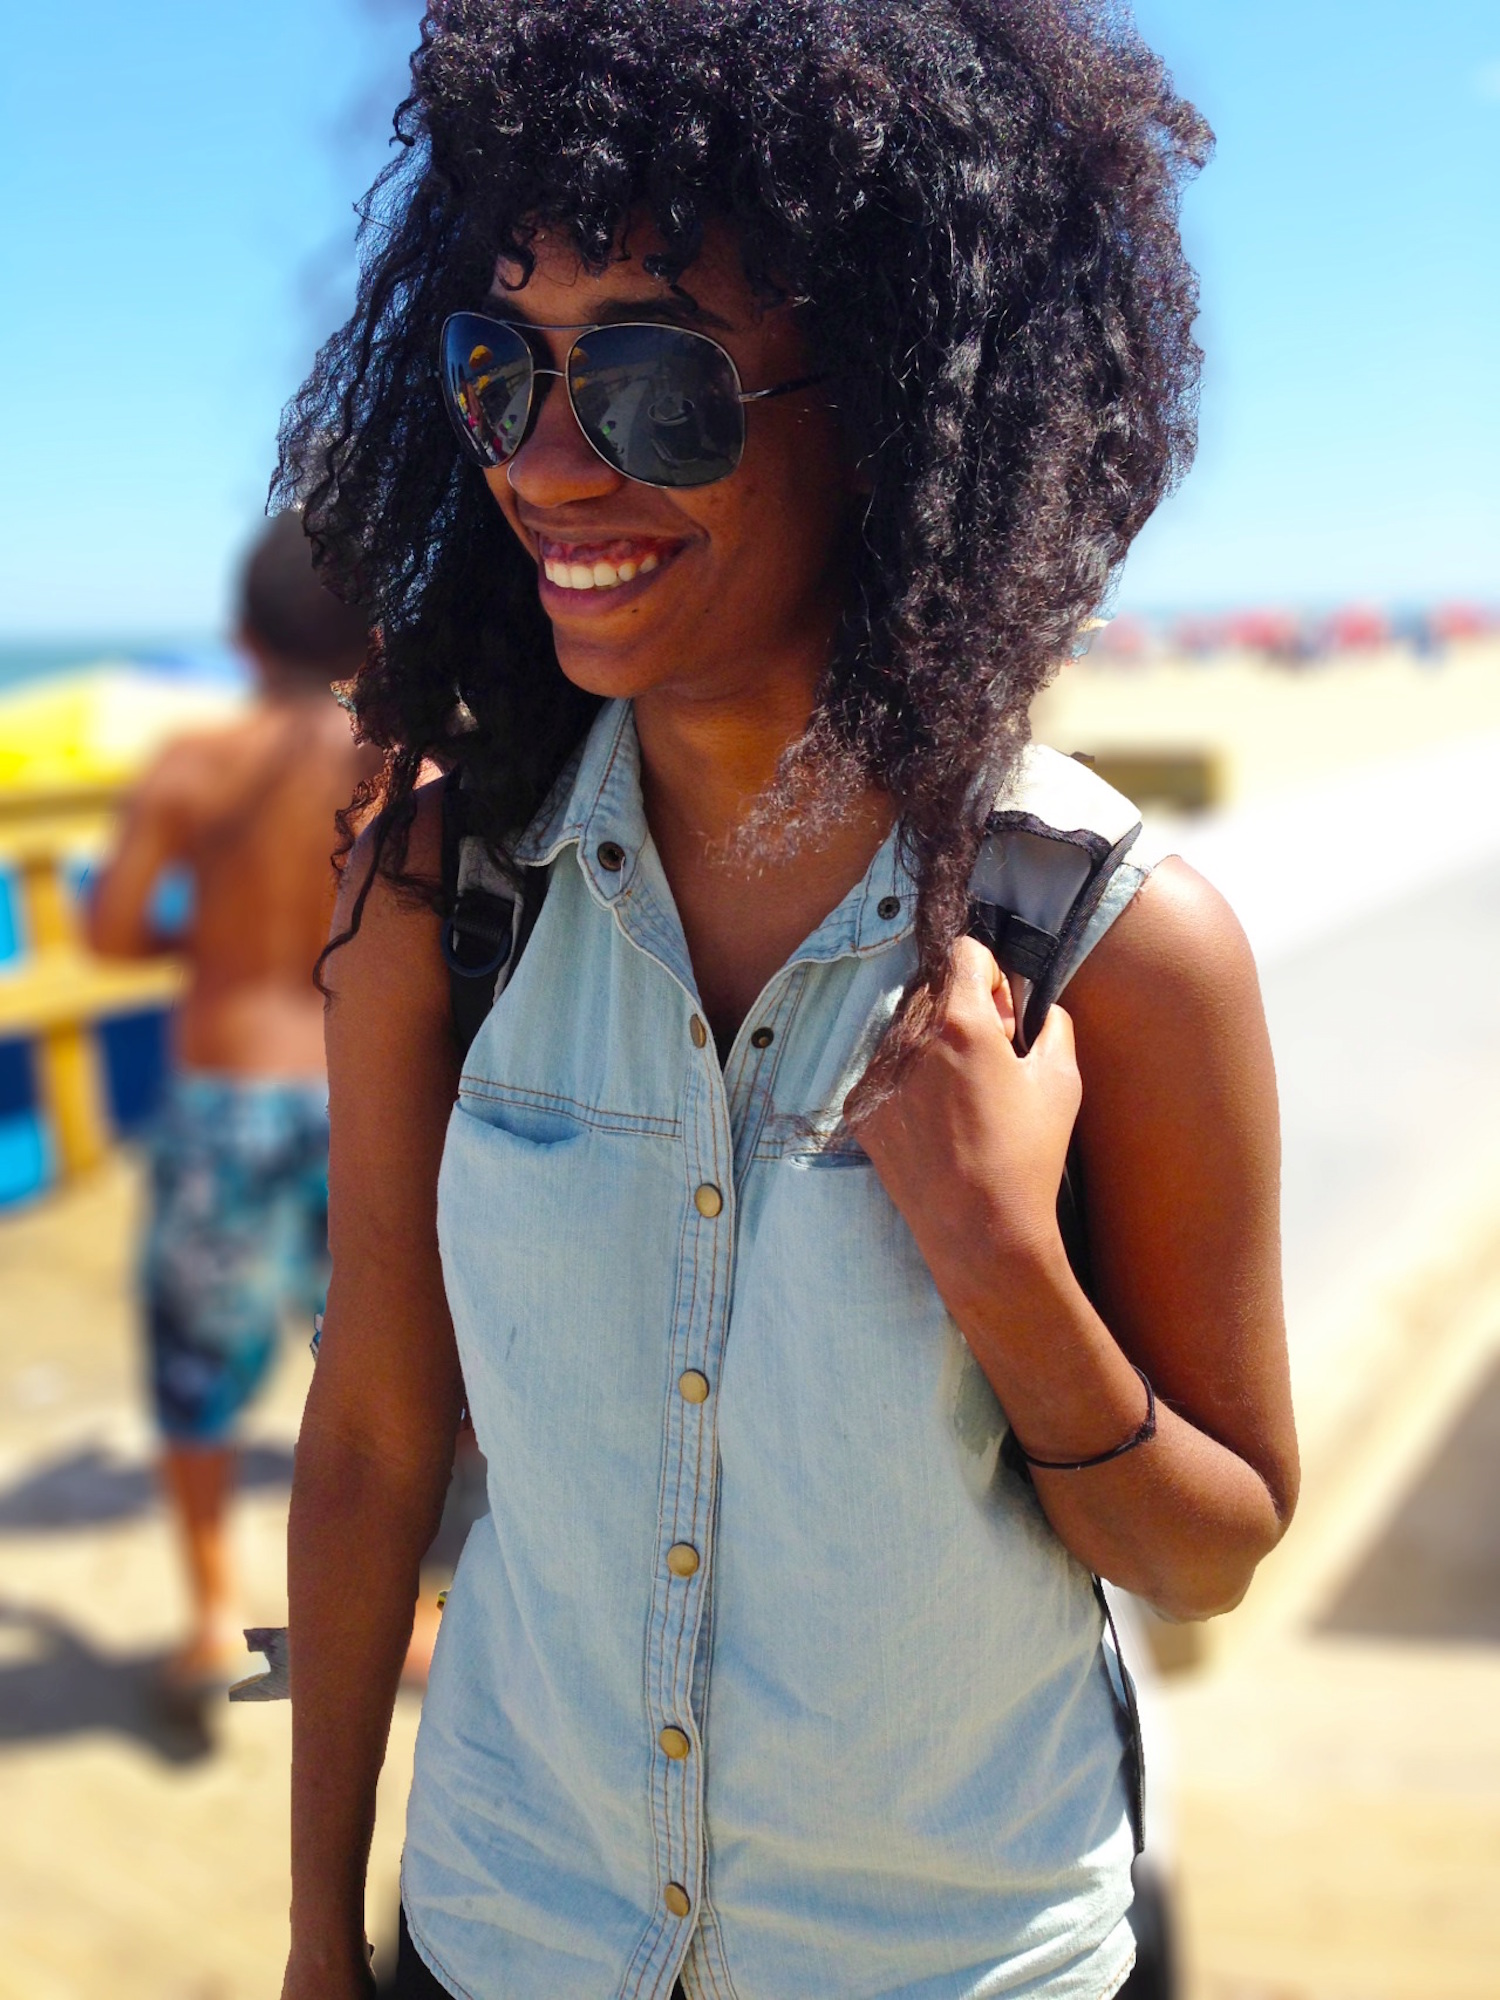 Solo travel for Black women - a smiling Black woman with a backpack on